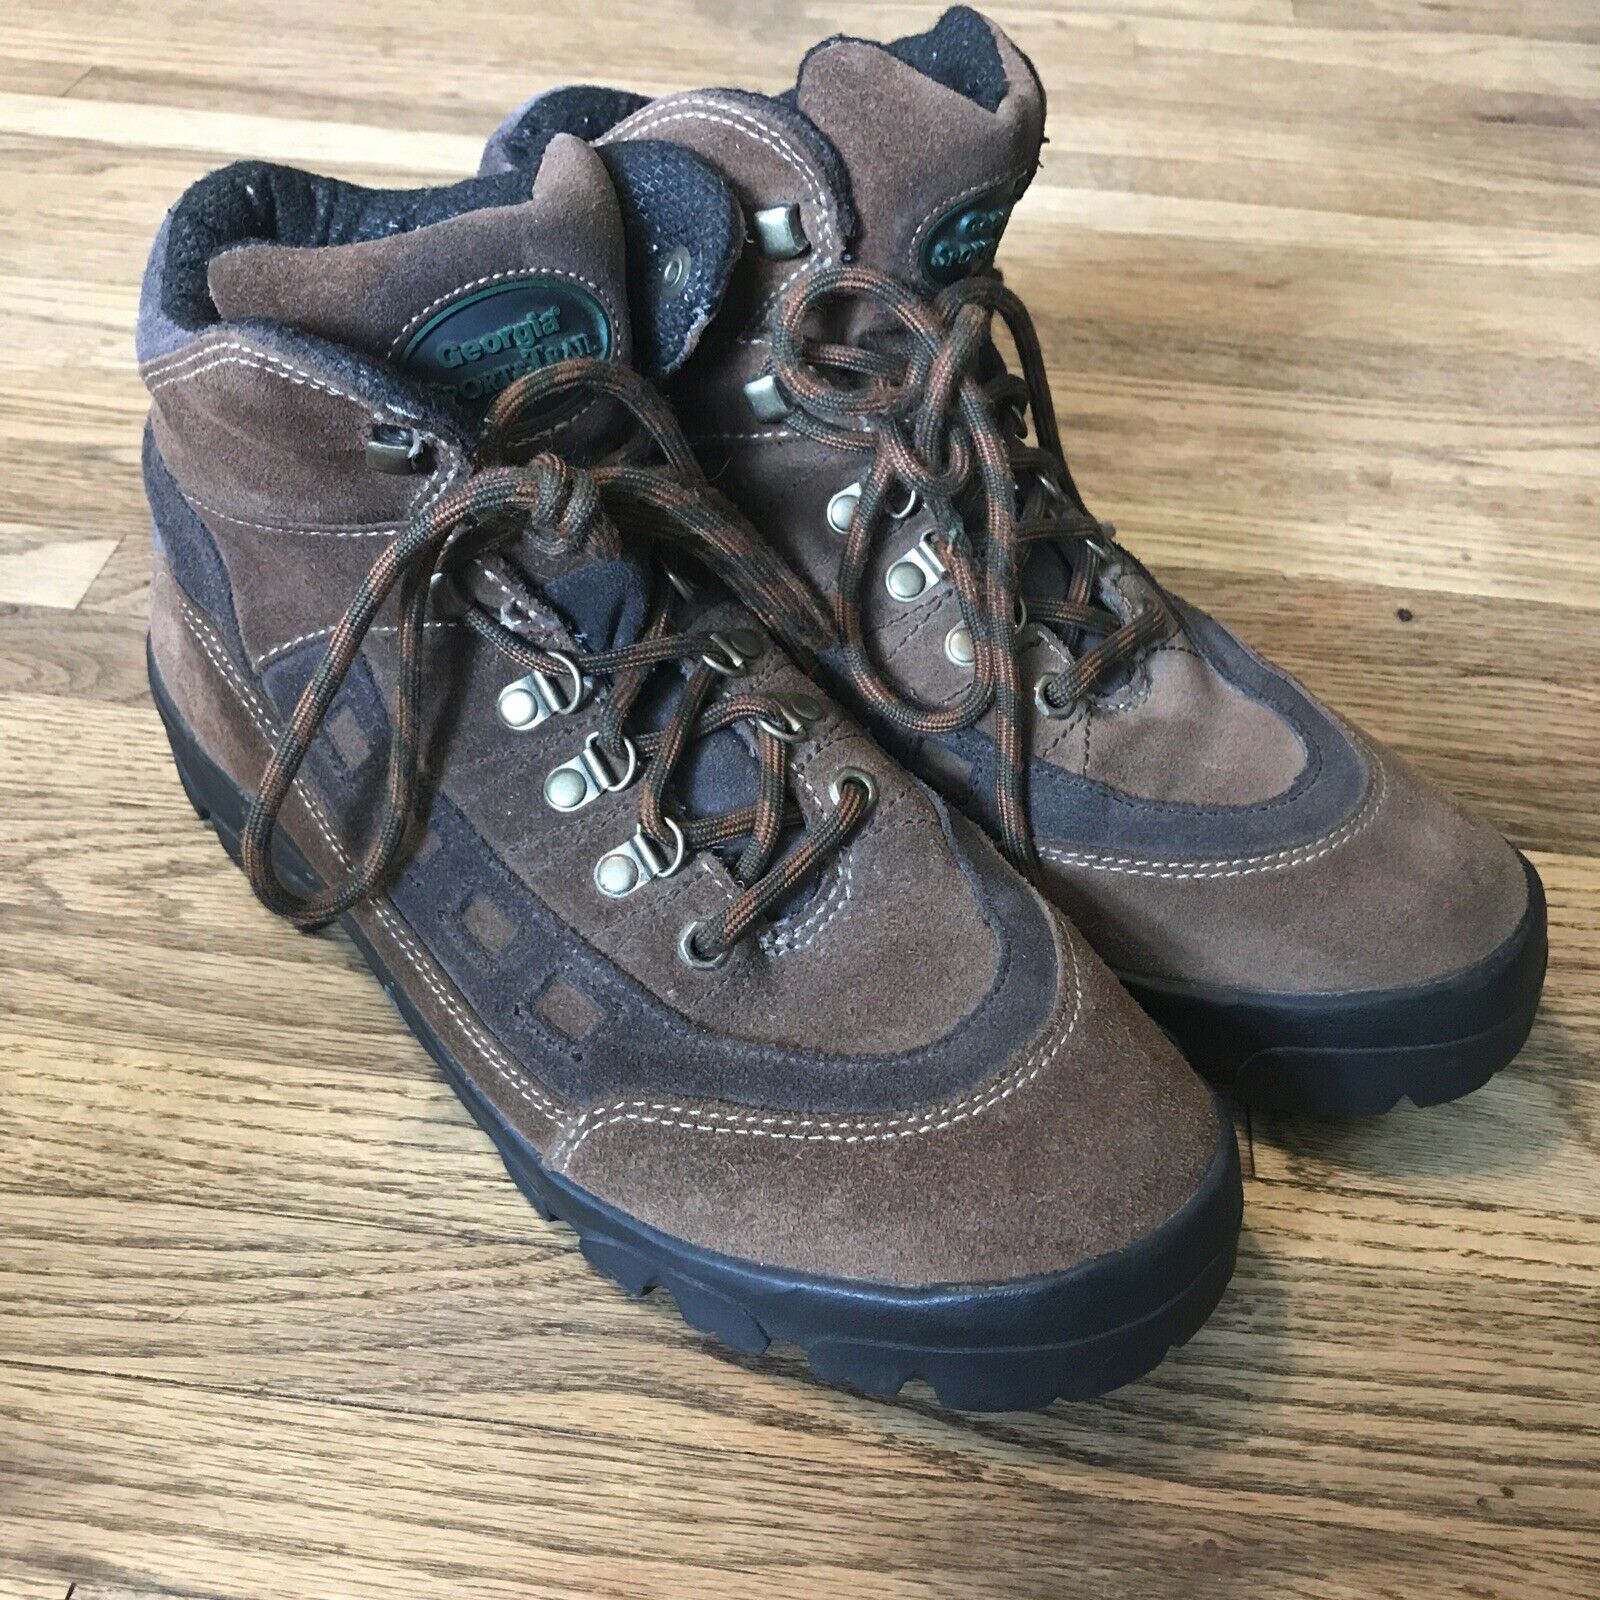 Georgia Boot Sport & Trail G7527 Brown Boots Mens Size Us 10.5 Hiking Outdoor